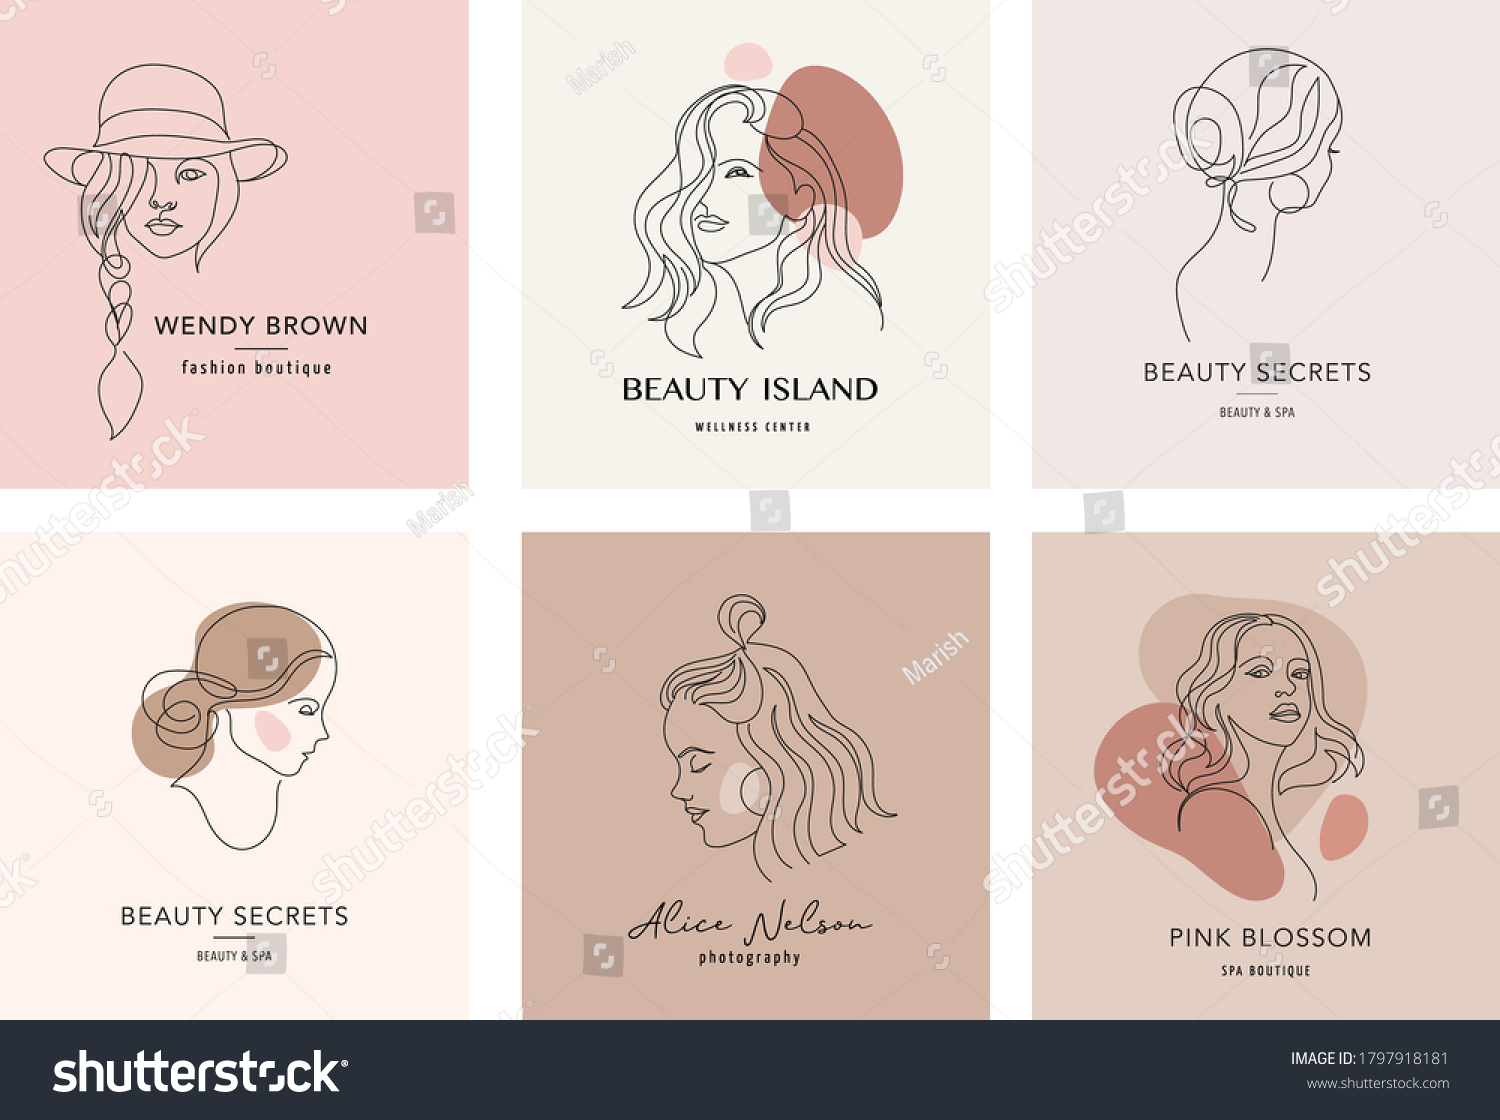 Vector logo and branding design templates in minimal style, for beauty center, fashion studio, haircut salon and cosmetics - female portrait, beautiful woman's face  #1797918181